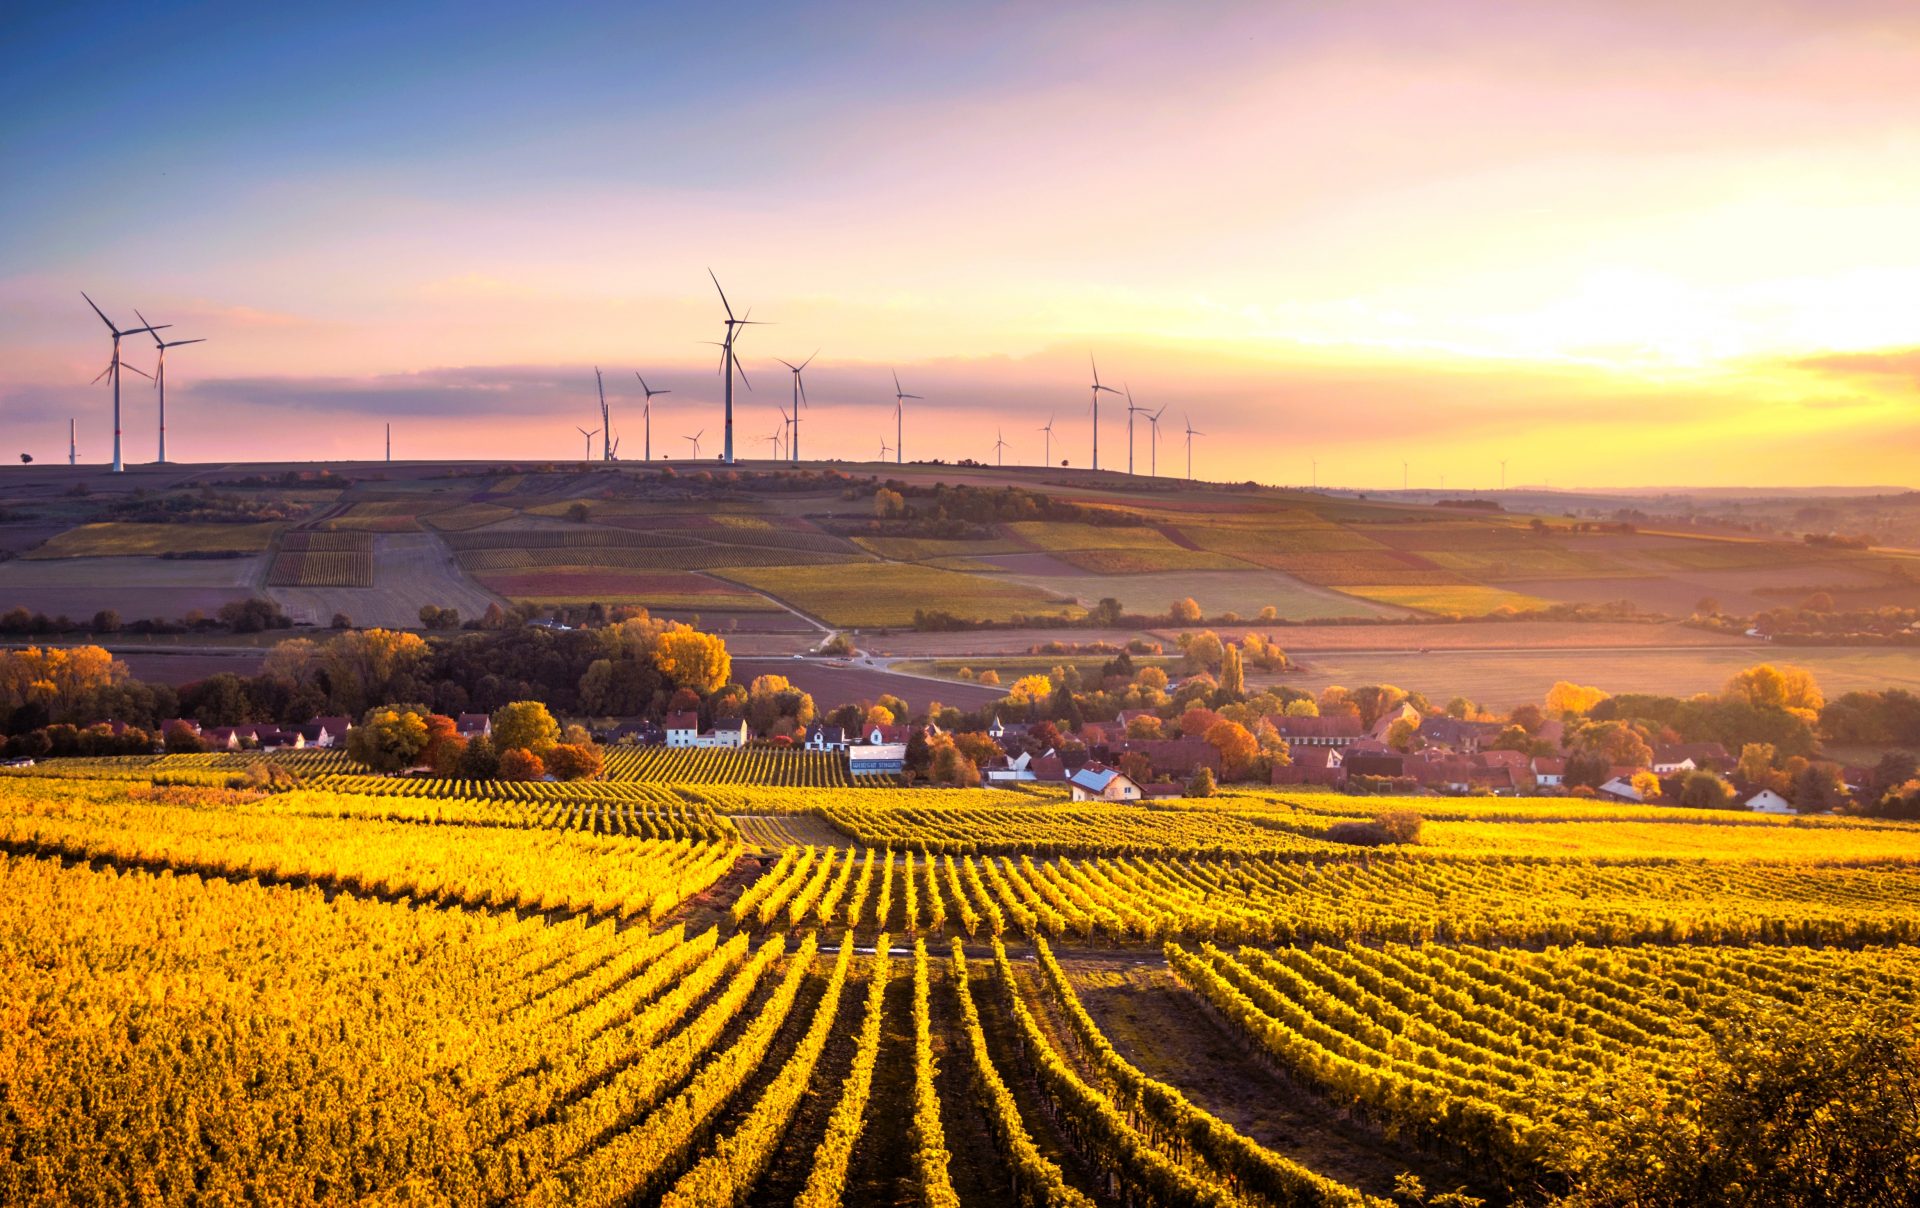 A plain with vineyard field in the sunset light with wind turbines in the background